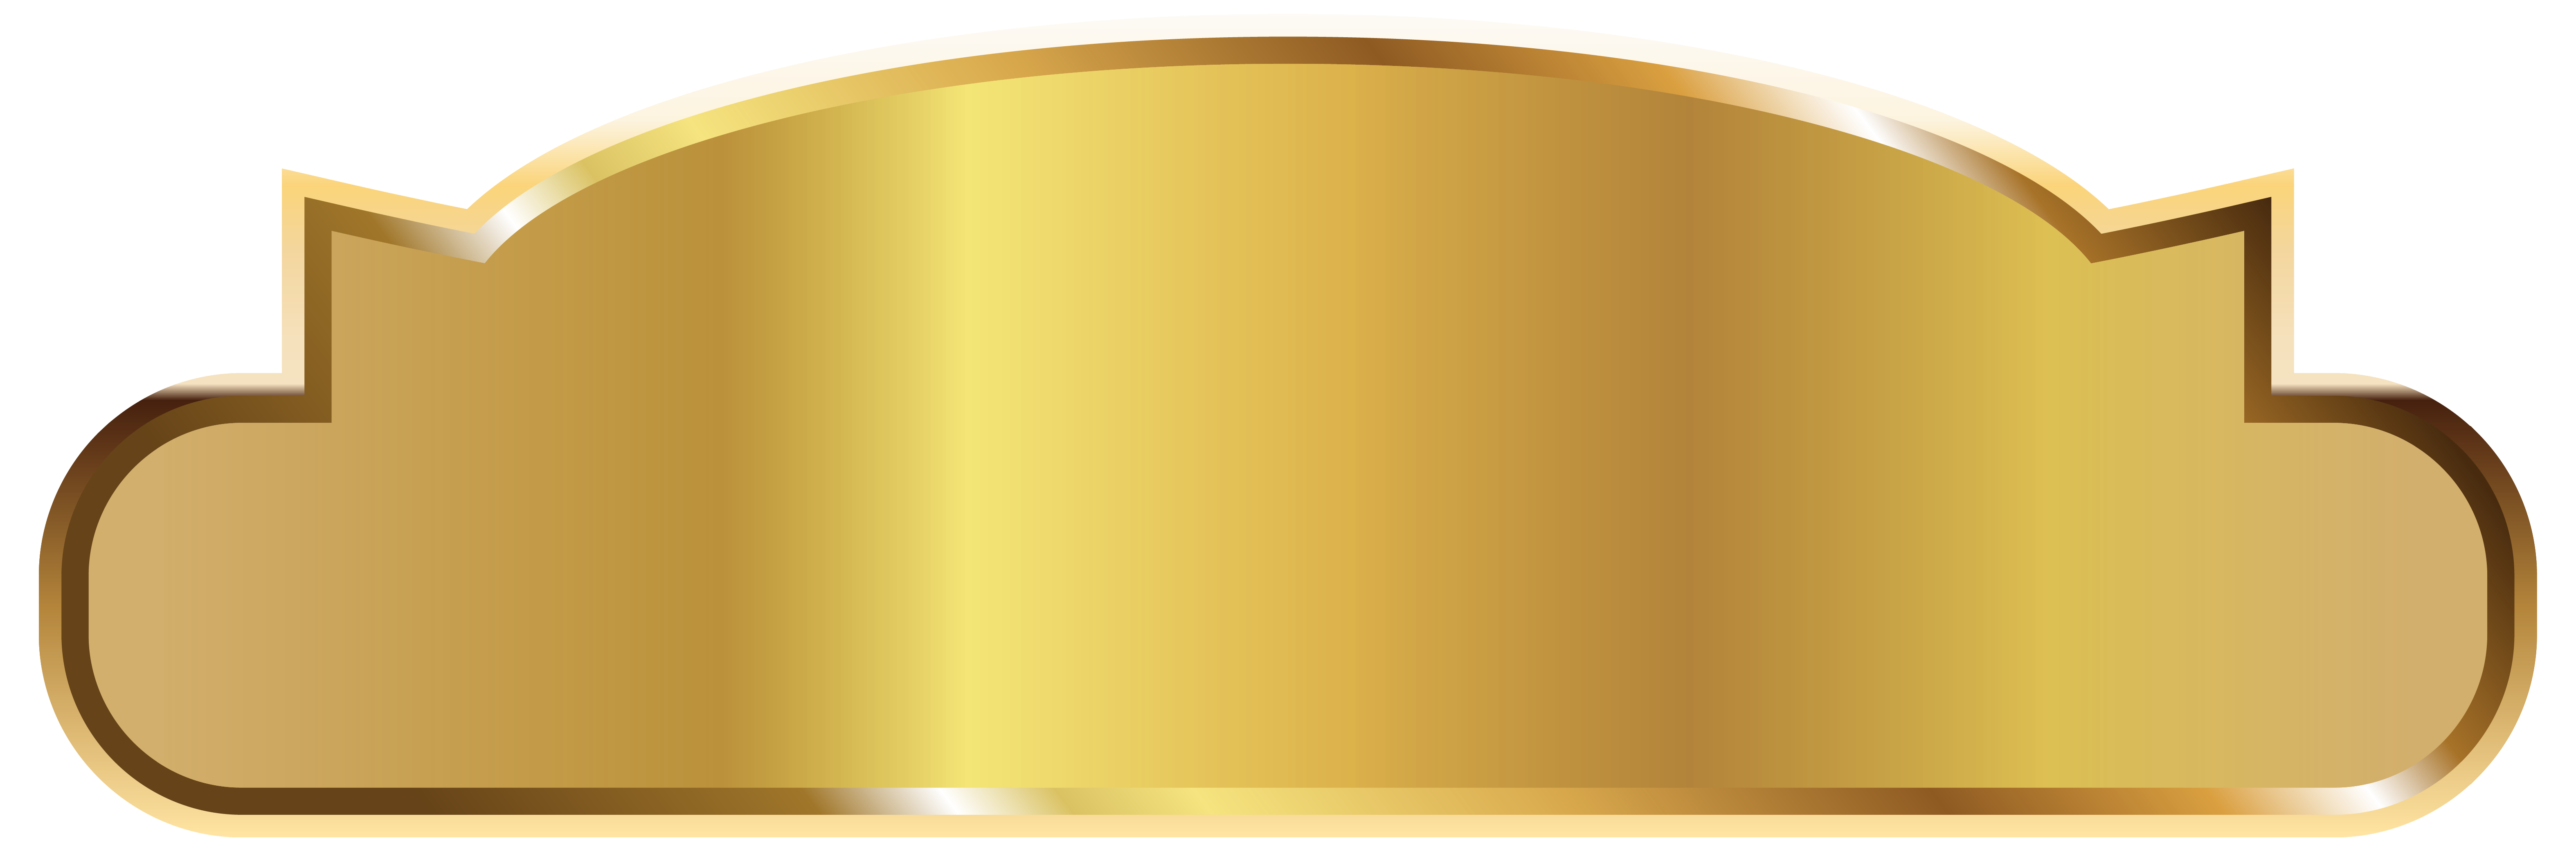 Gold PNG Pic Background